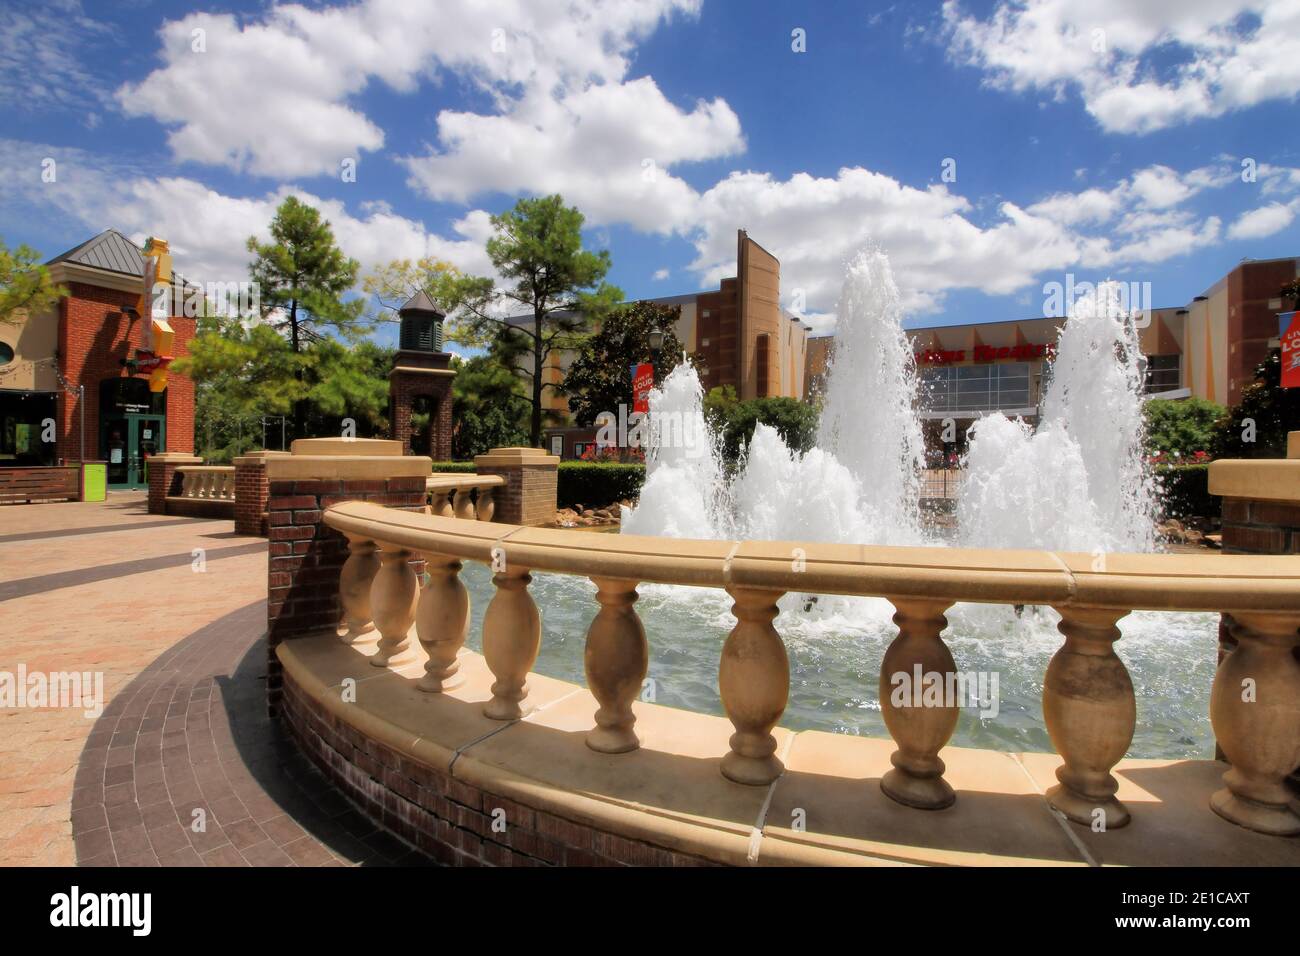 A close up of Centennial Fountain in the plaza of Bricktown in downtown Oklahoma City. Stock Photo